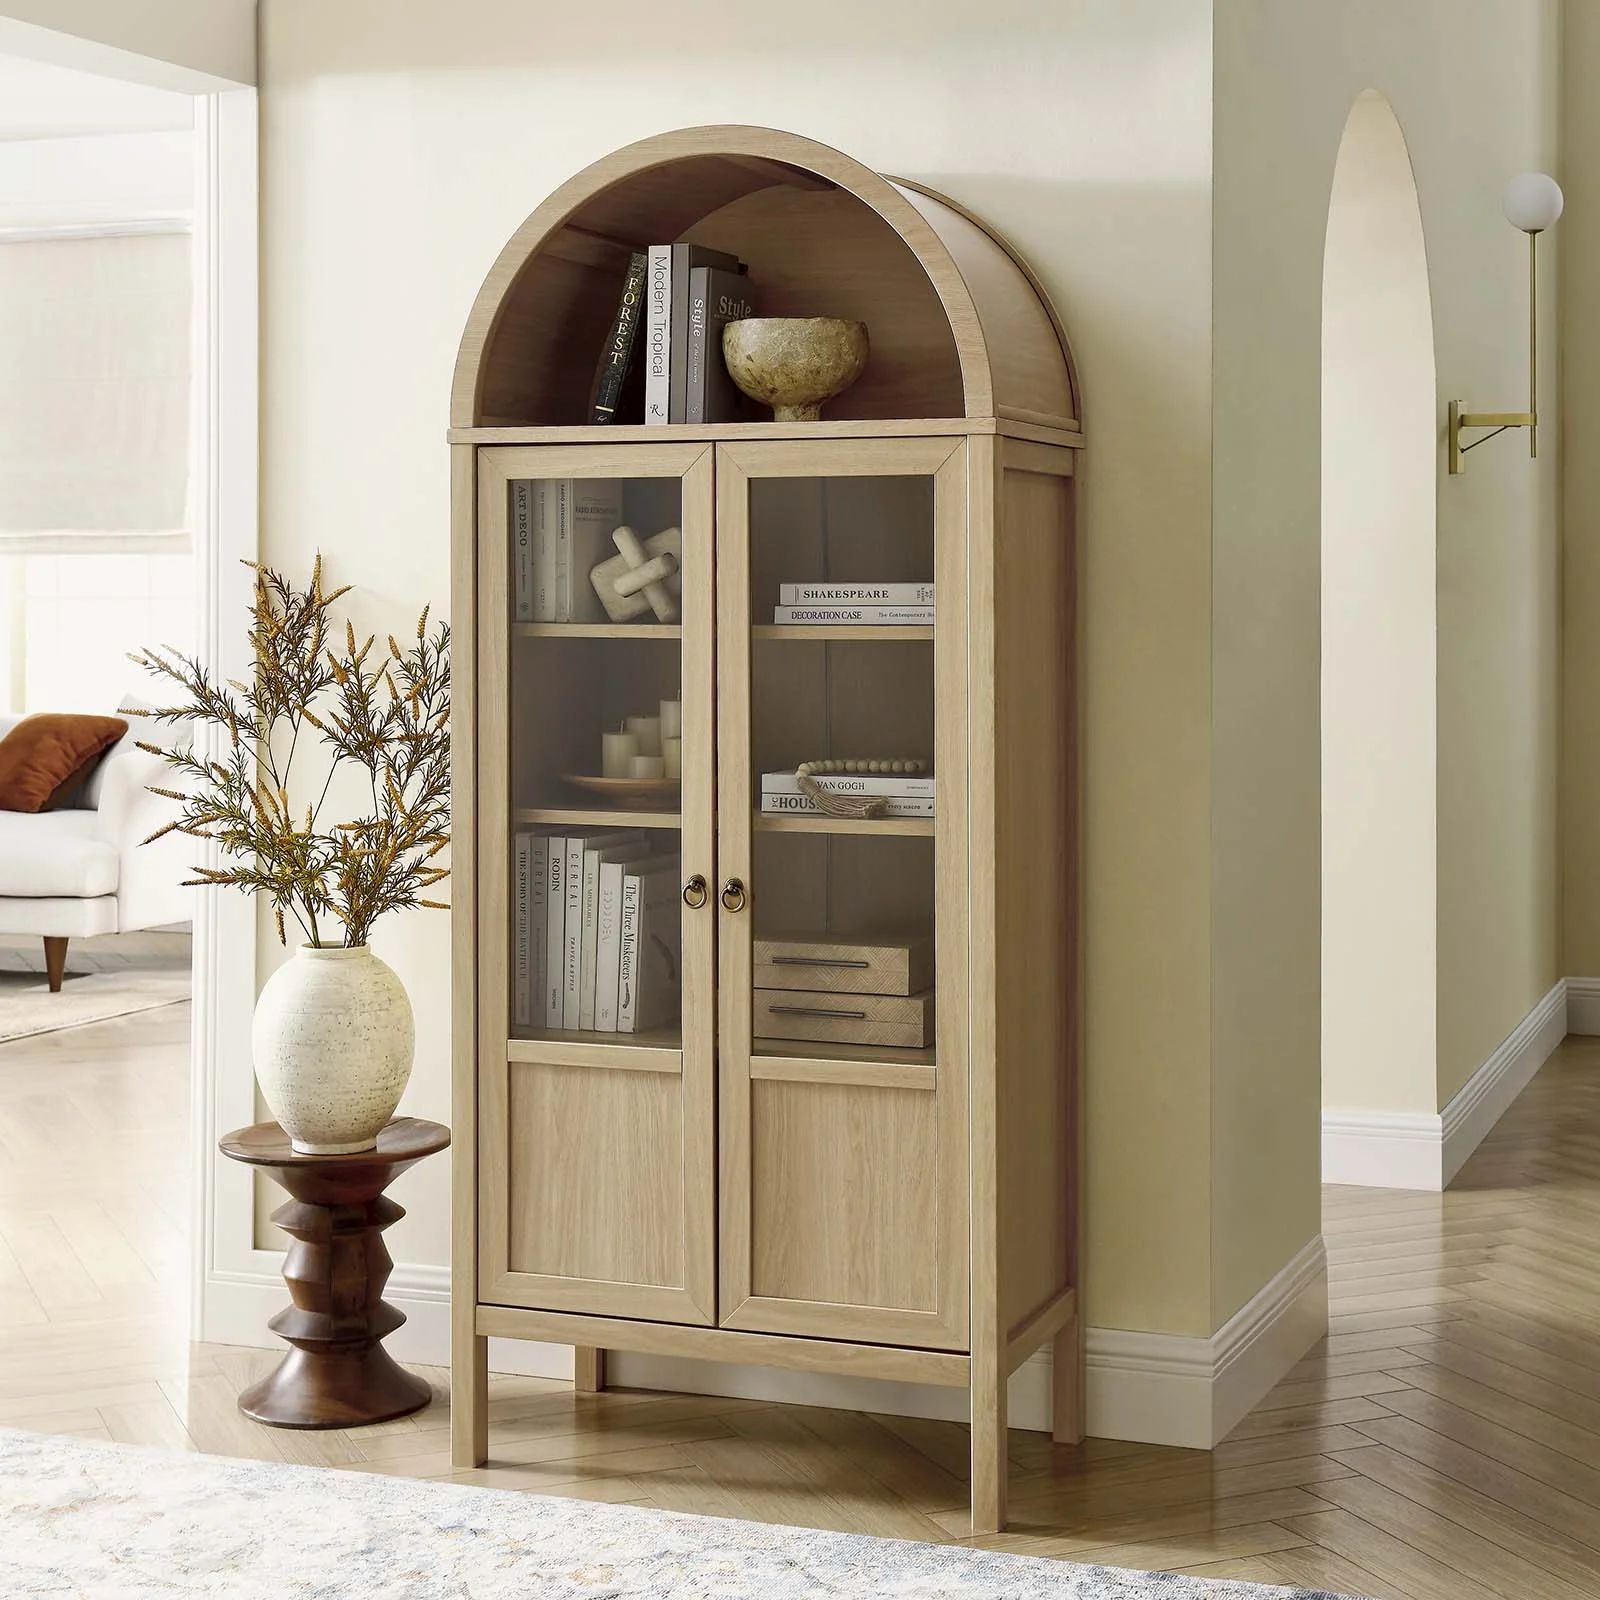 Best seller Modway Modway Tessa Tall Arched Storage Display Cabinet in Oak (1.0)1 star out of 1 r... | Walmart (US)